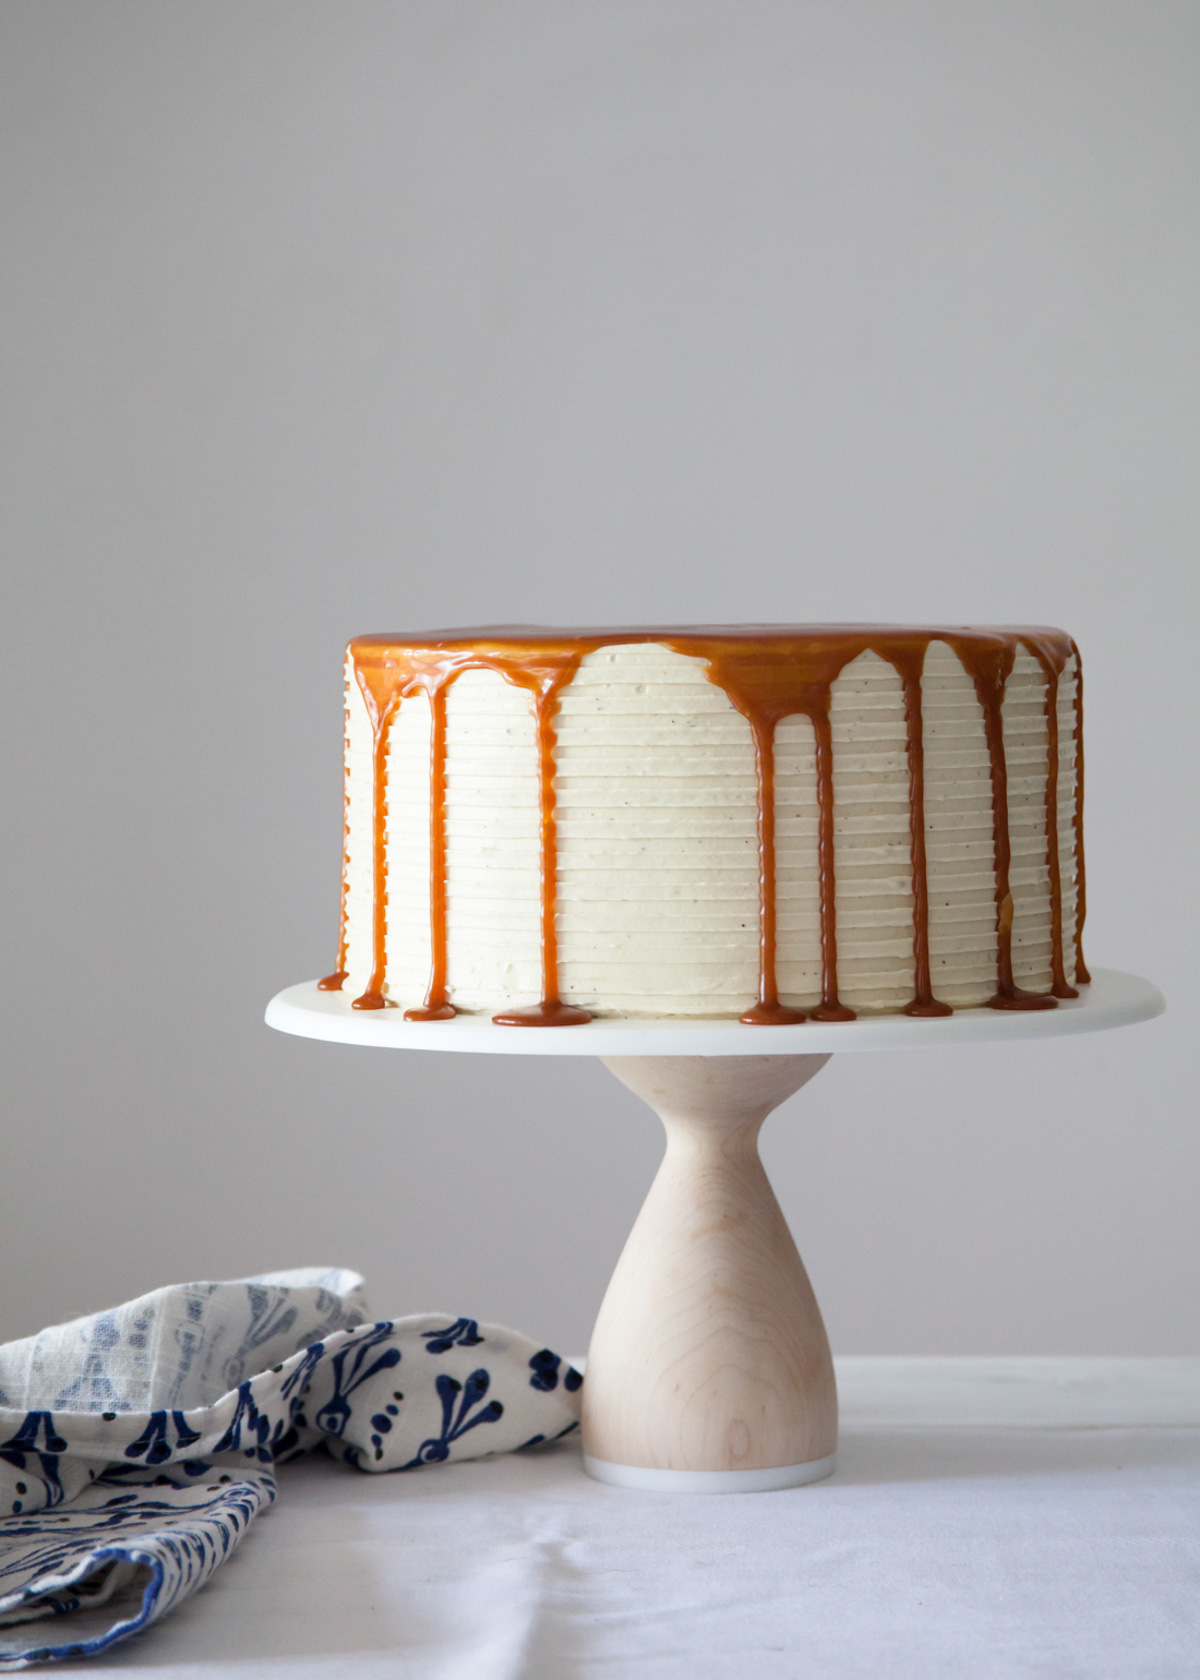 A London Fog cake on a cake stand with dripping caramel sauce